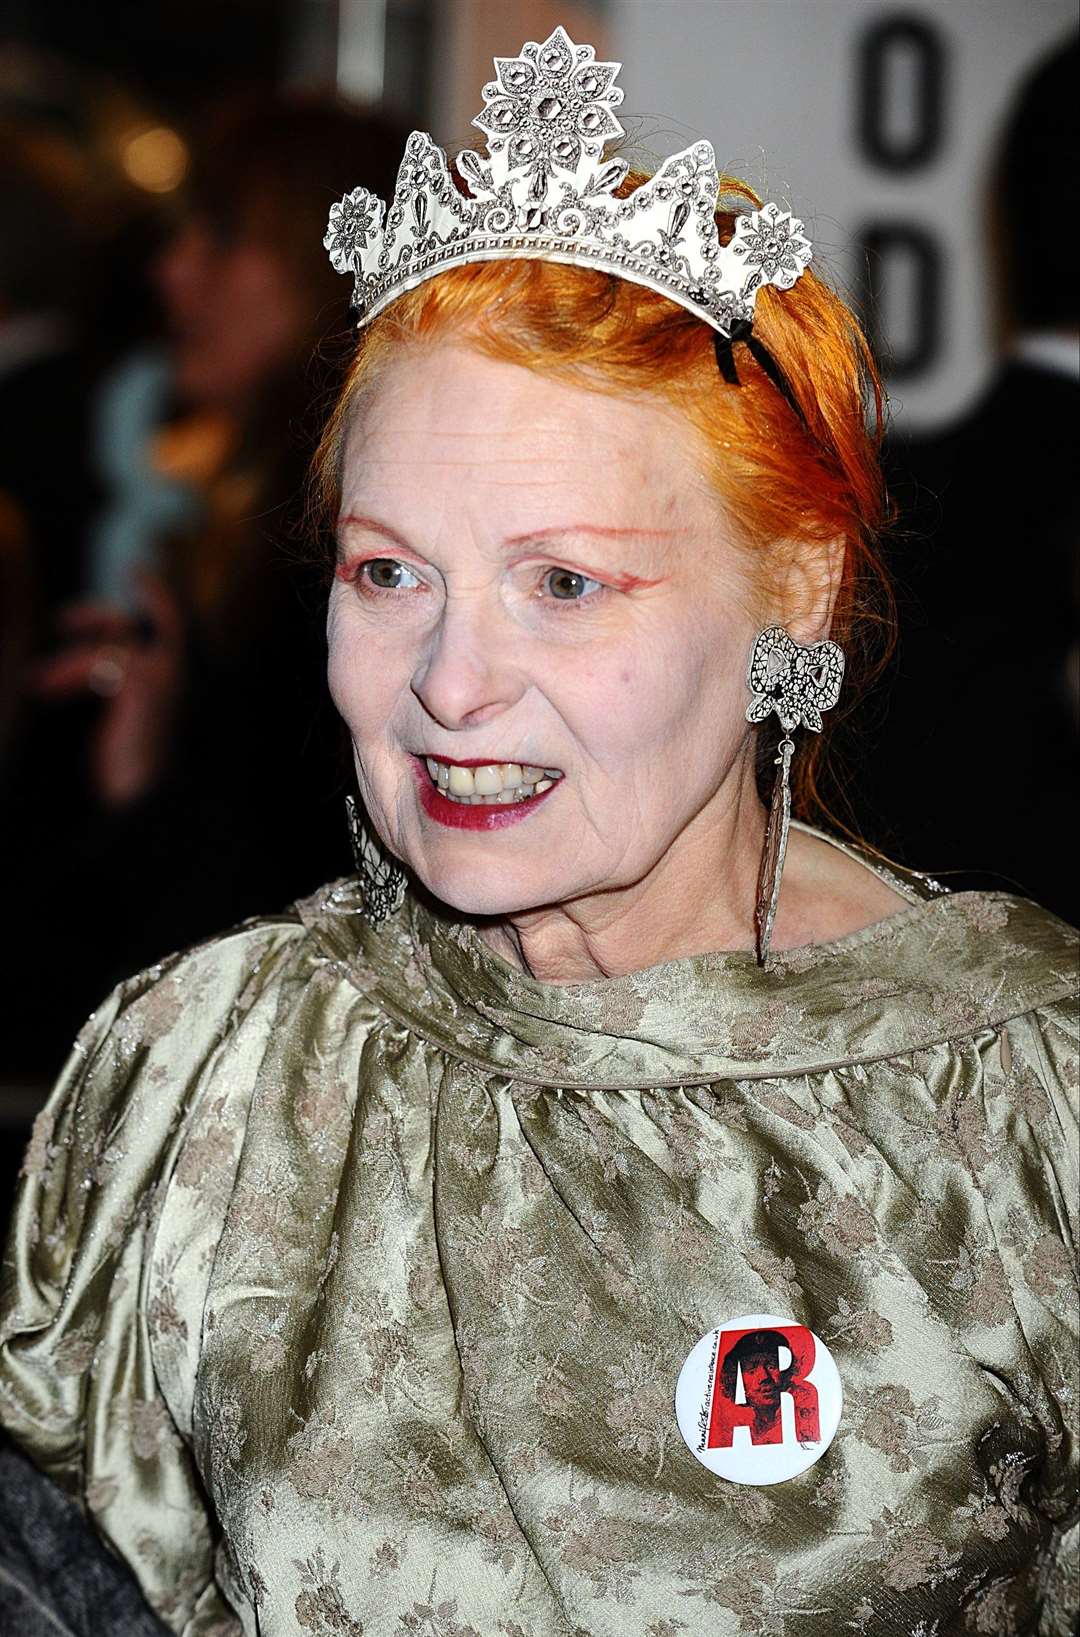 The designer arrives for the royal world premiere of Alice in Wonderland at the Odeon, Leicester Square, in 2010